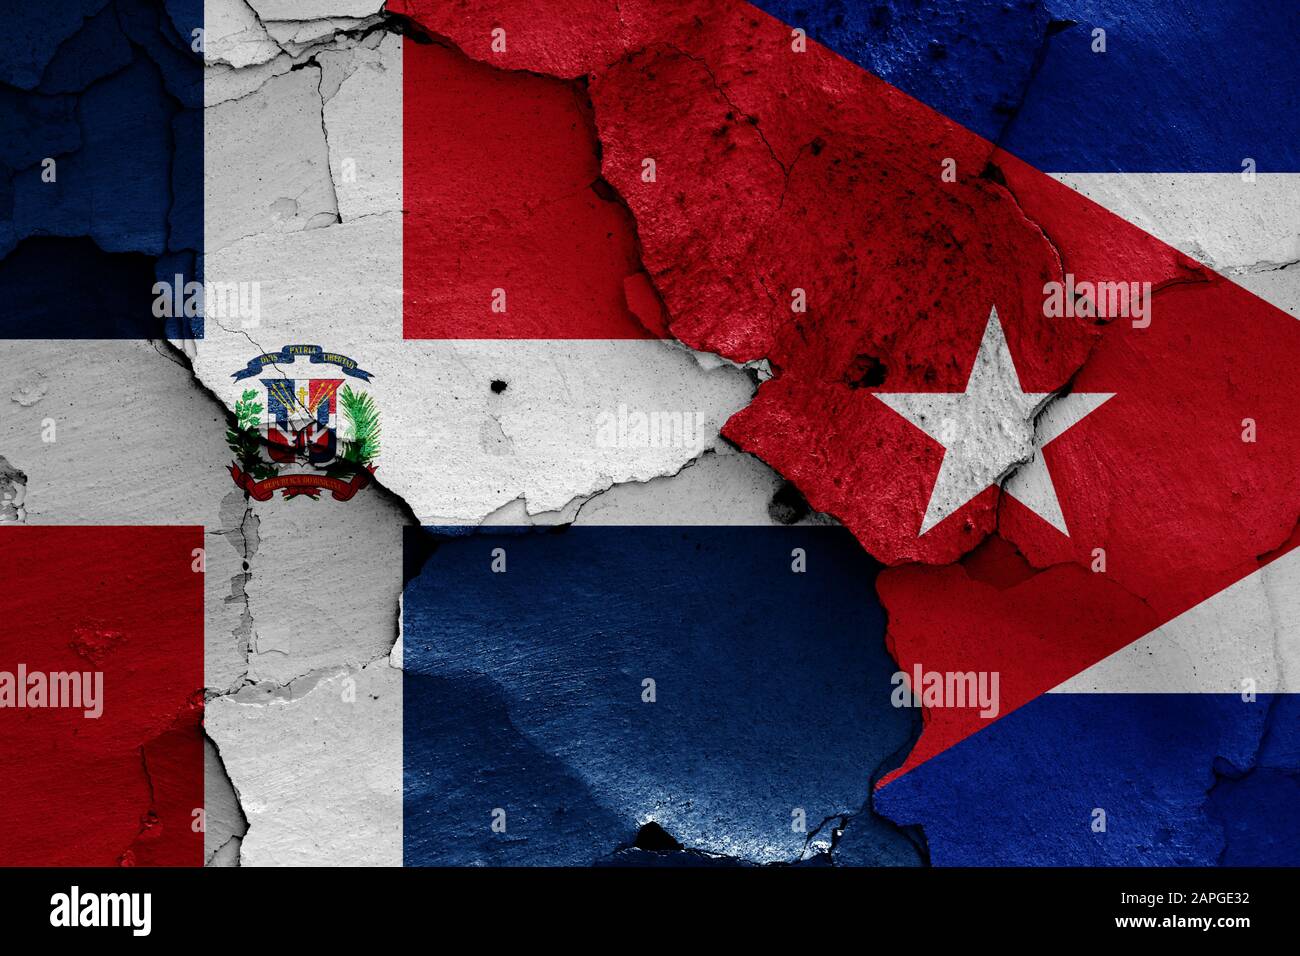 flags of Dominican Republic and Cuba painted on cracked wall Stock Photo